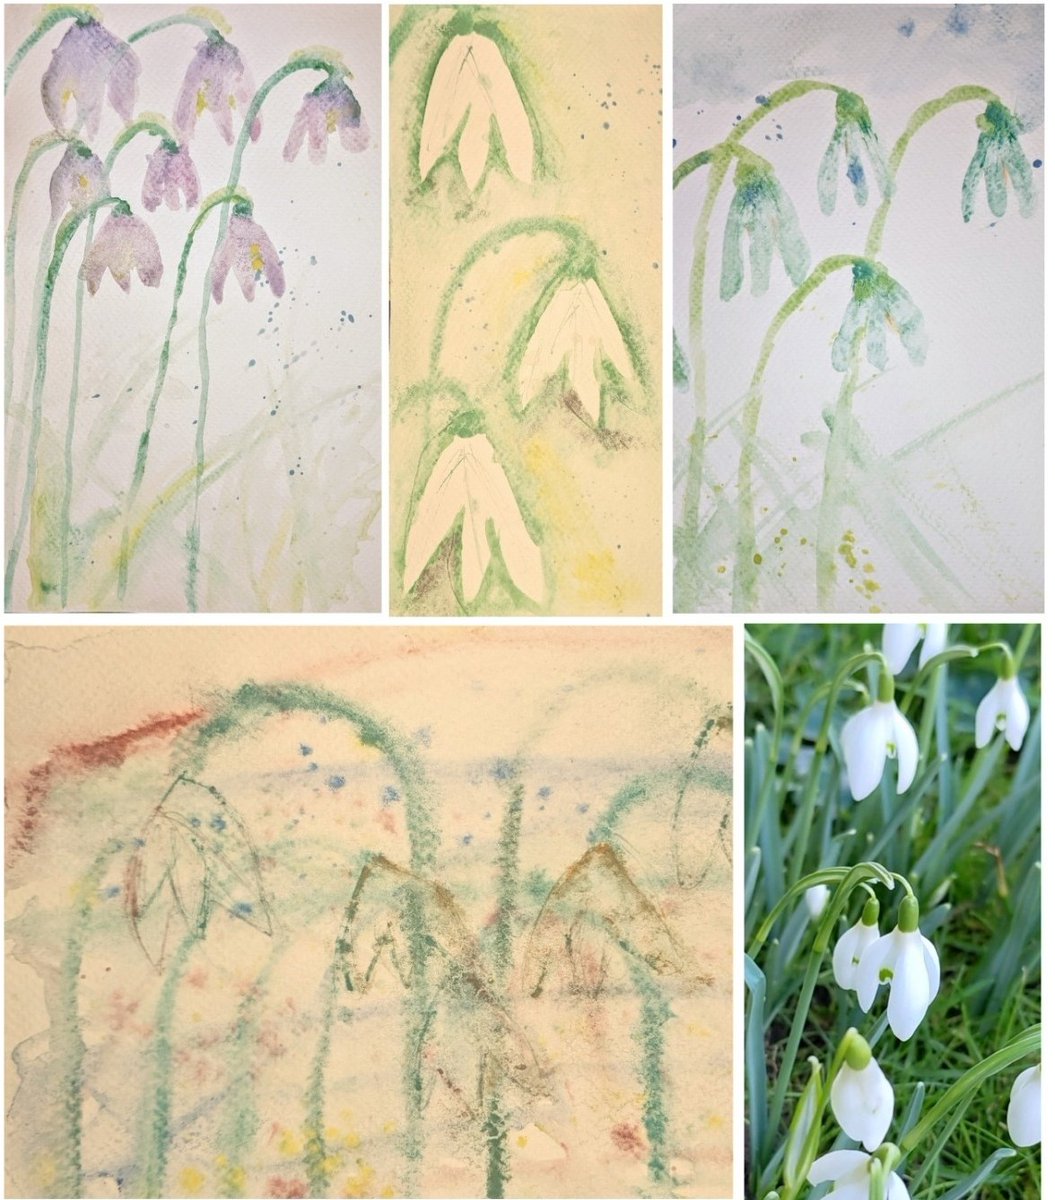 Such a relaxed workshop with NPMS volunteers last week. Artist Iris Hill helped us explore the Snowdrop, developing uses of watercolour and letting go of perfectionism! Thanks to all those who joined. As one participant said 'Can't we have watercolour Wednesday every week now?!'